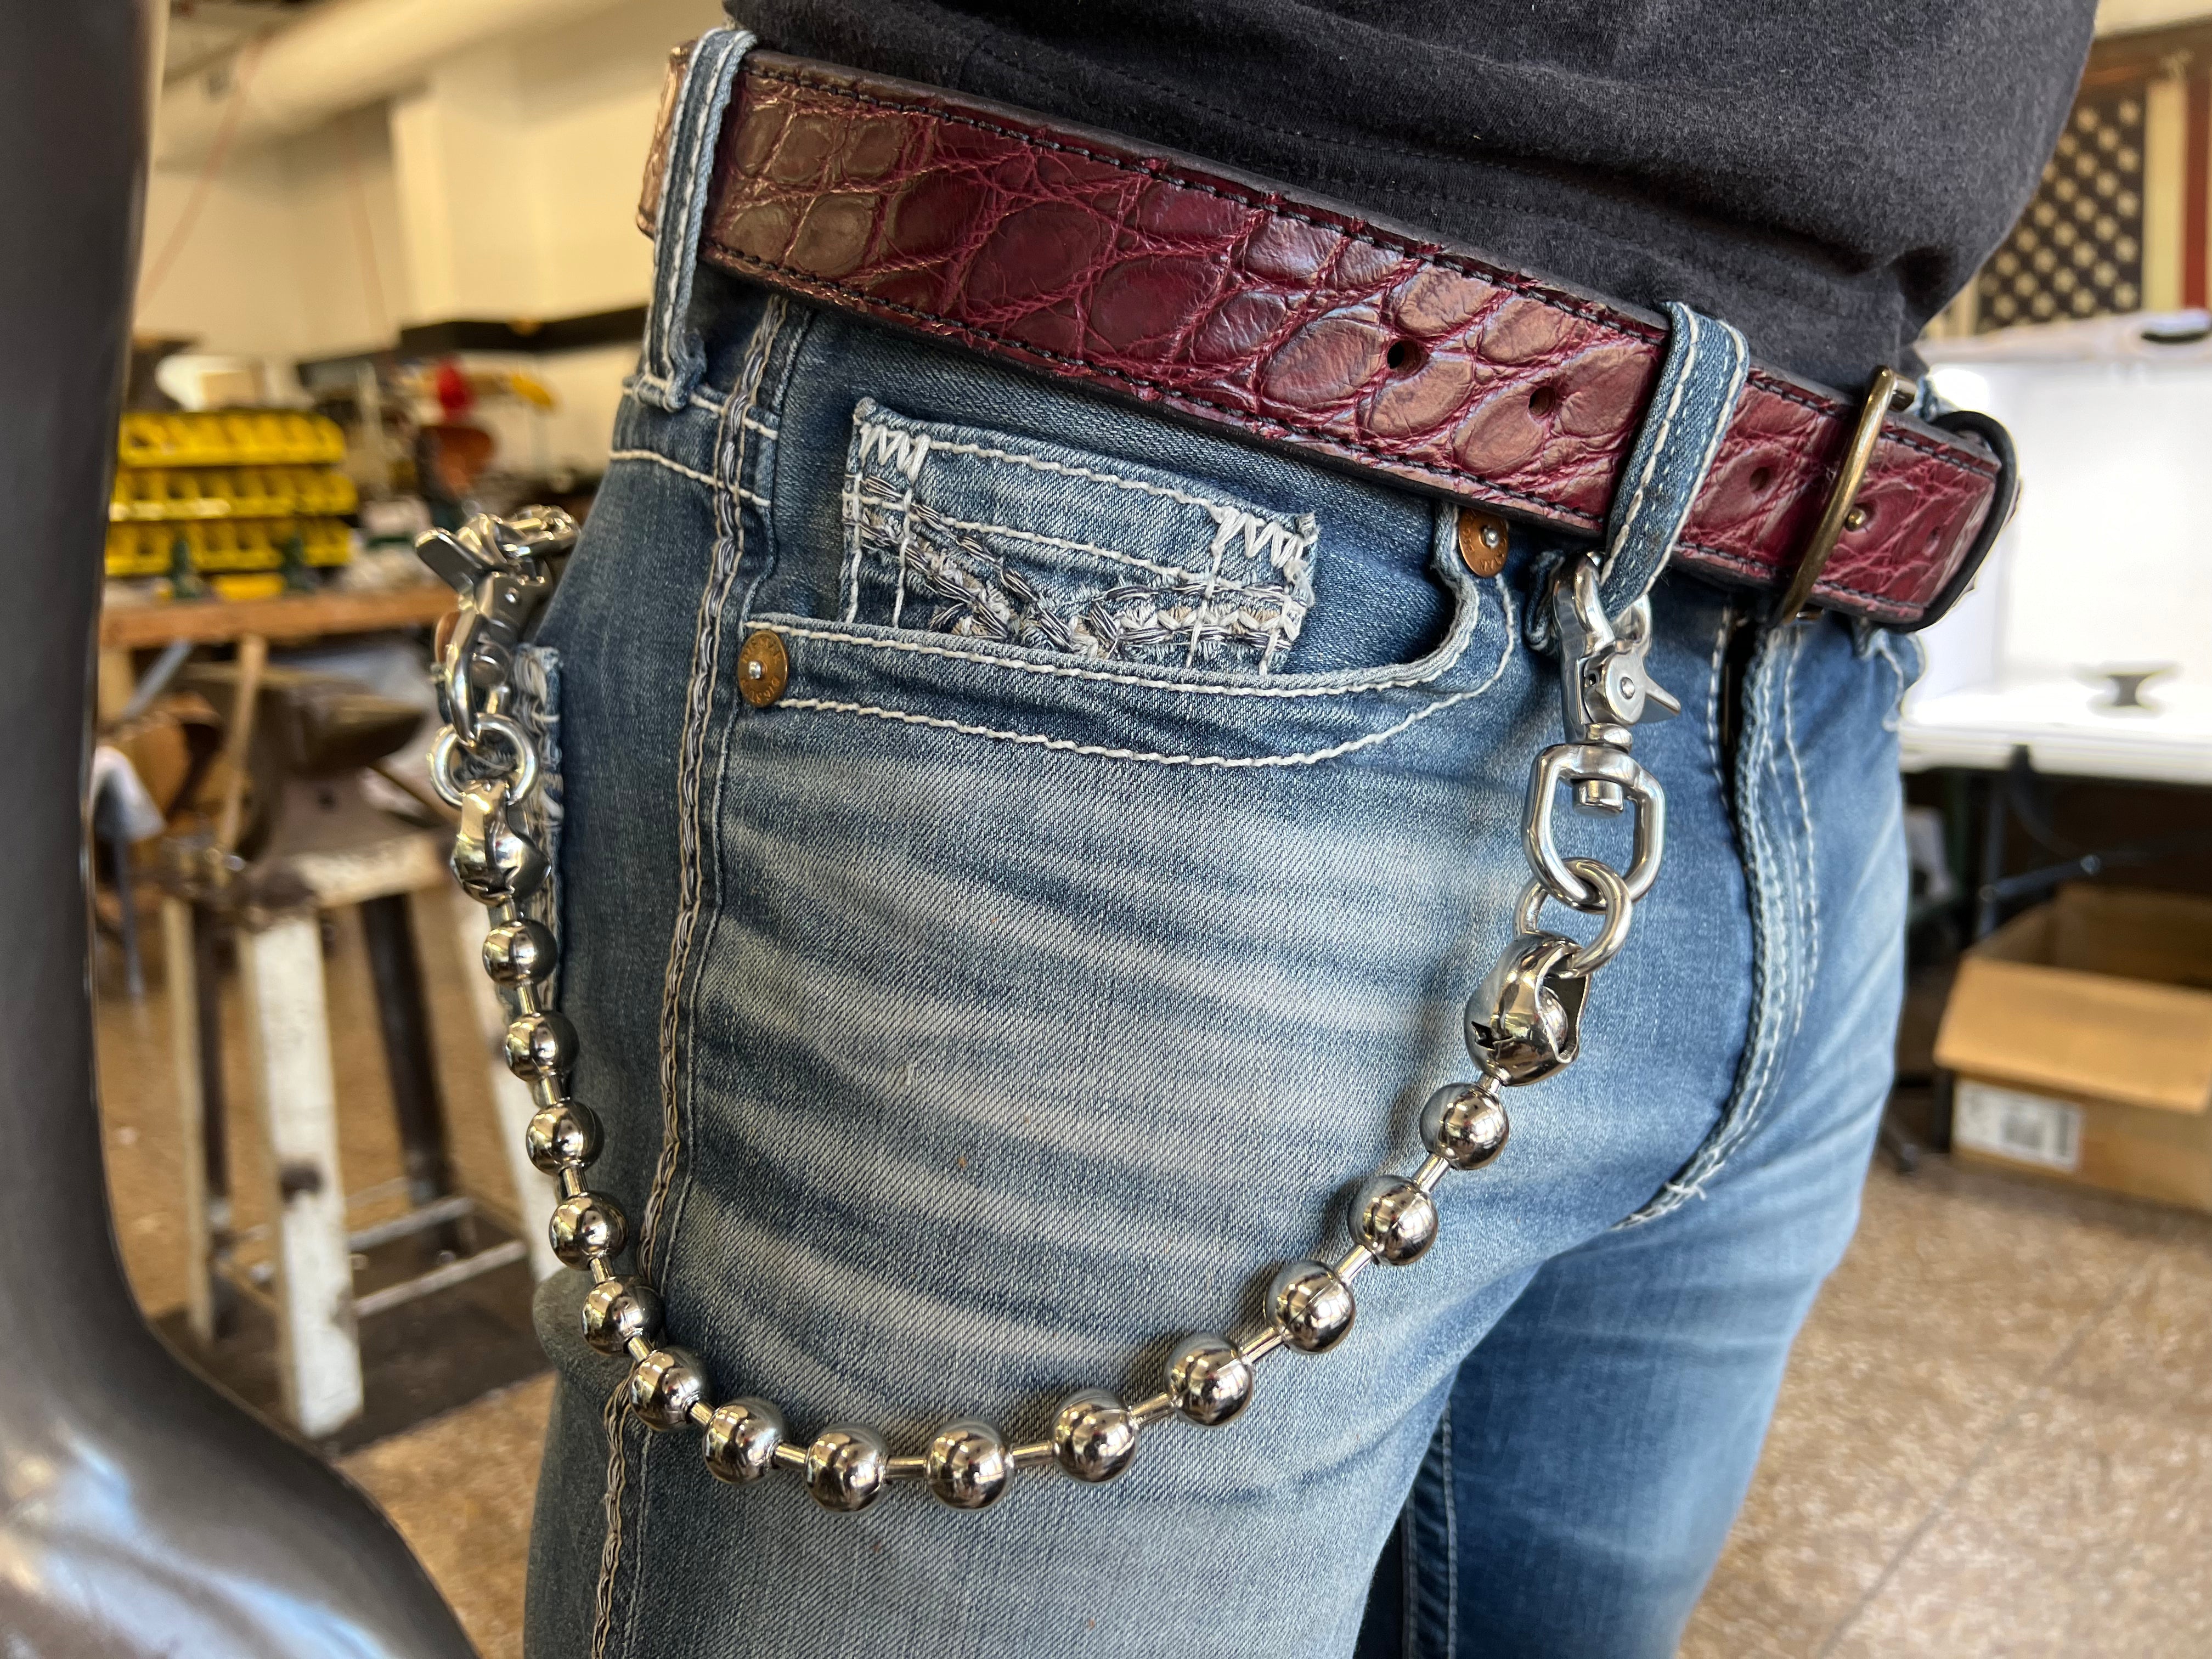 18” Stainless Ball Style Wallet Chain w/Custom Hardware - Anvil